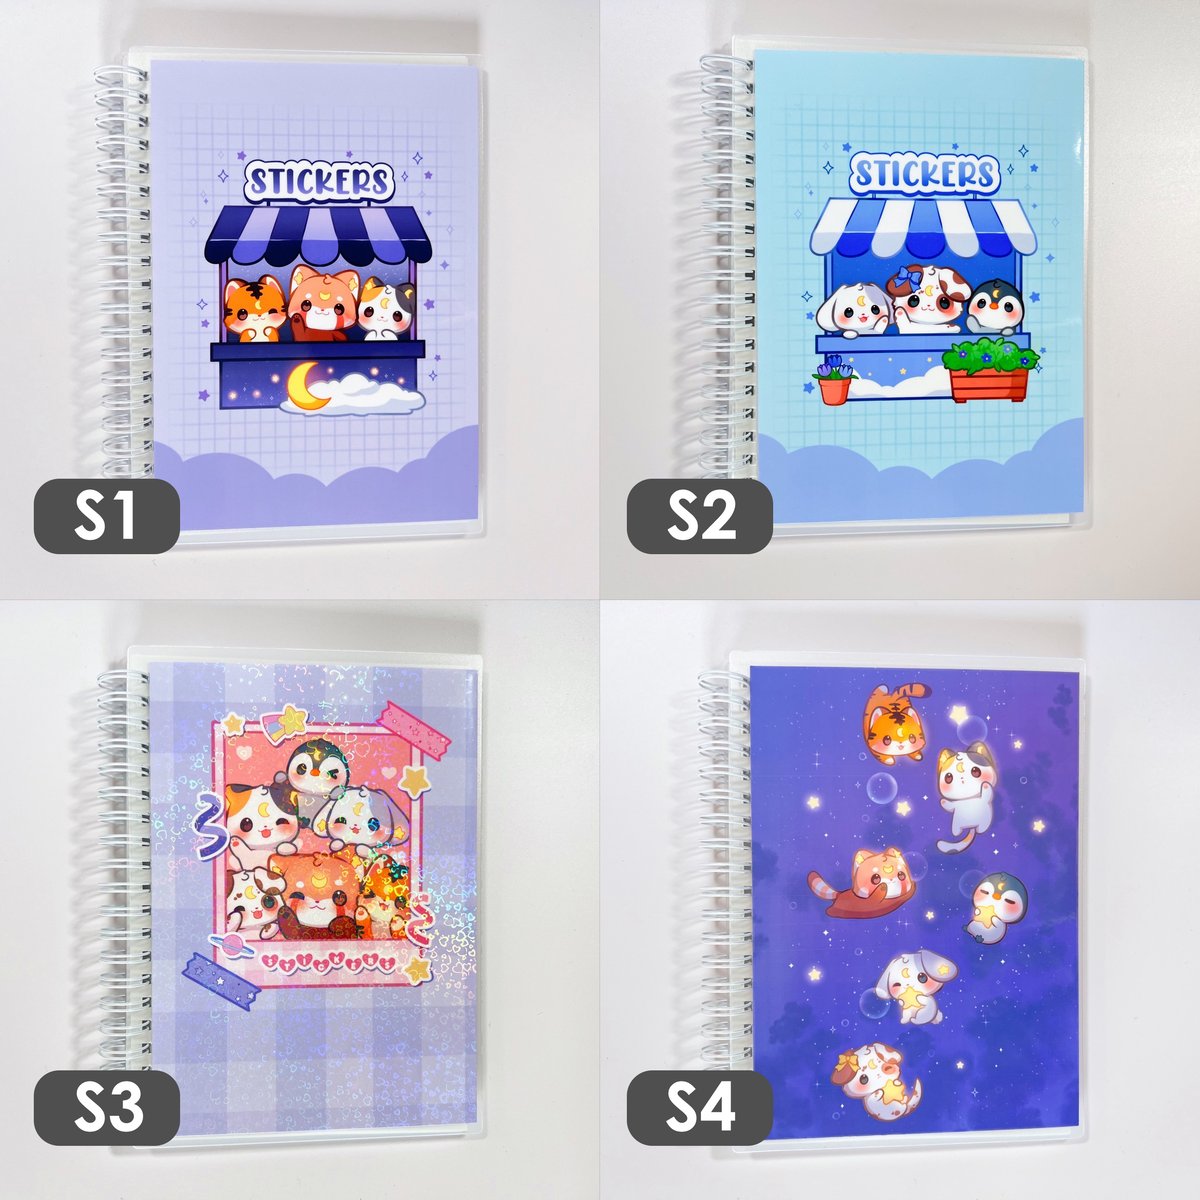 2 Sticker Collecting Albums, Reusable Sticker Books 24X2 Sheets-A5 (8.3X5.7 Inches)£¬Sticker Activity Album for Collecting Stickers, Labels (b5+a4)